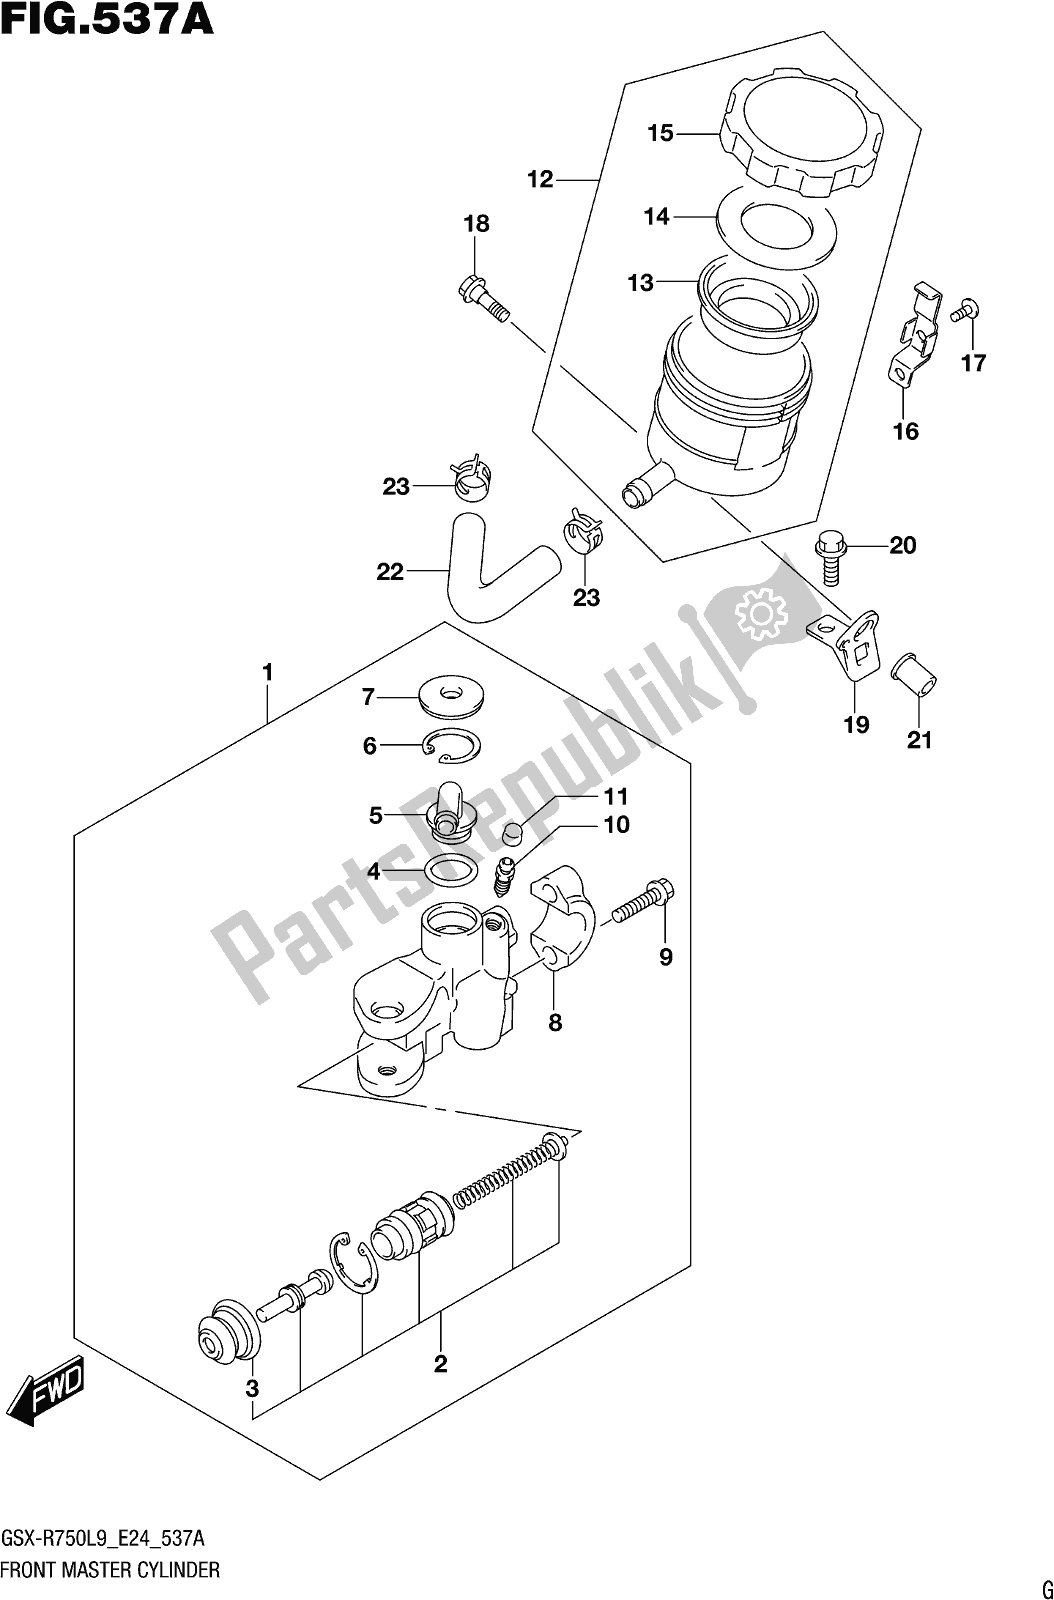 All parts for the Fig. 537a Front Master Cylinder of the Suzuki Gsx-r 750 2019